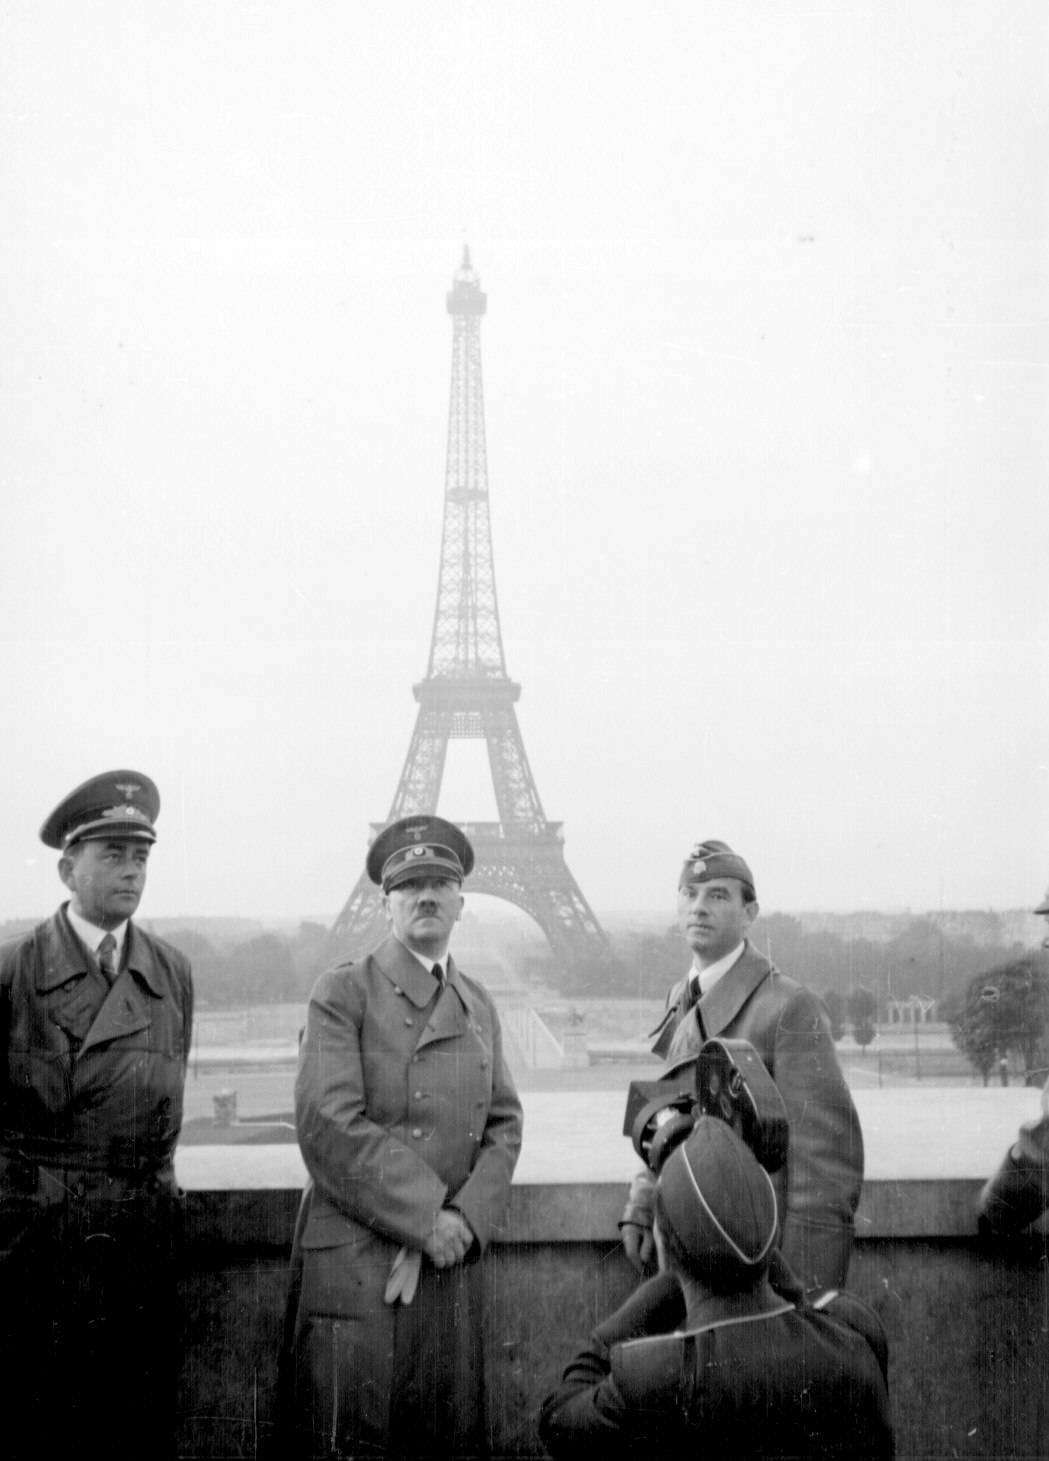 Photograph of Adolf Hitler in Paris, posing with Eiffel Tower in the background - June 23, 1940.